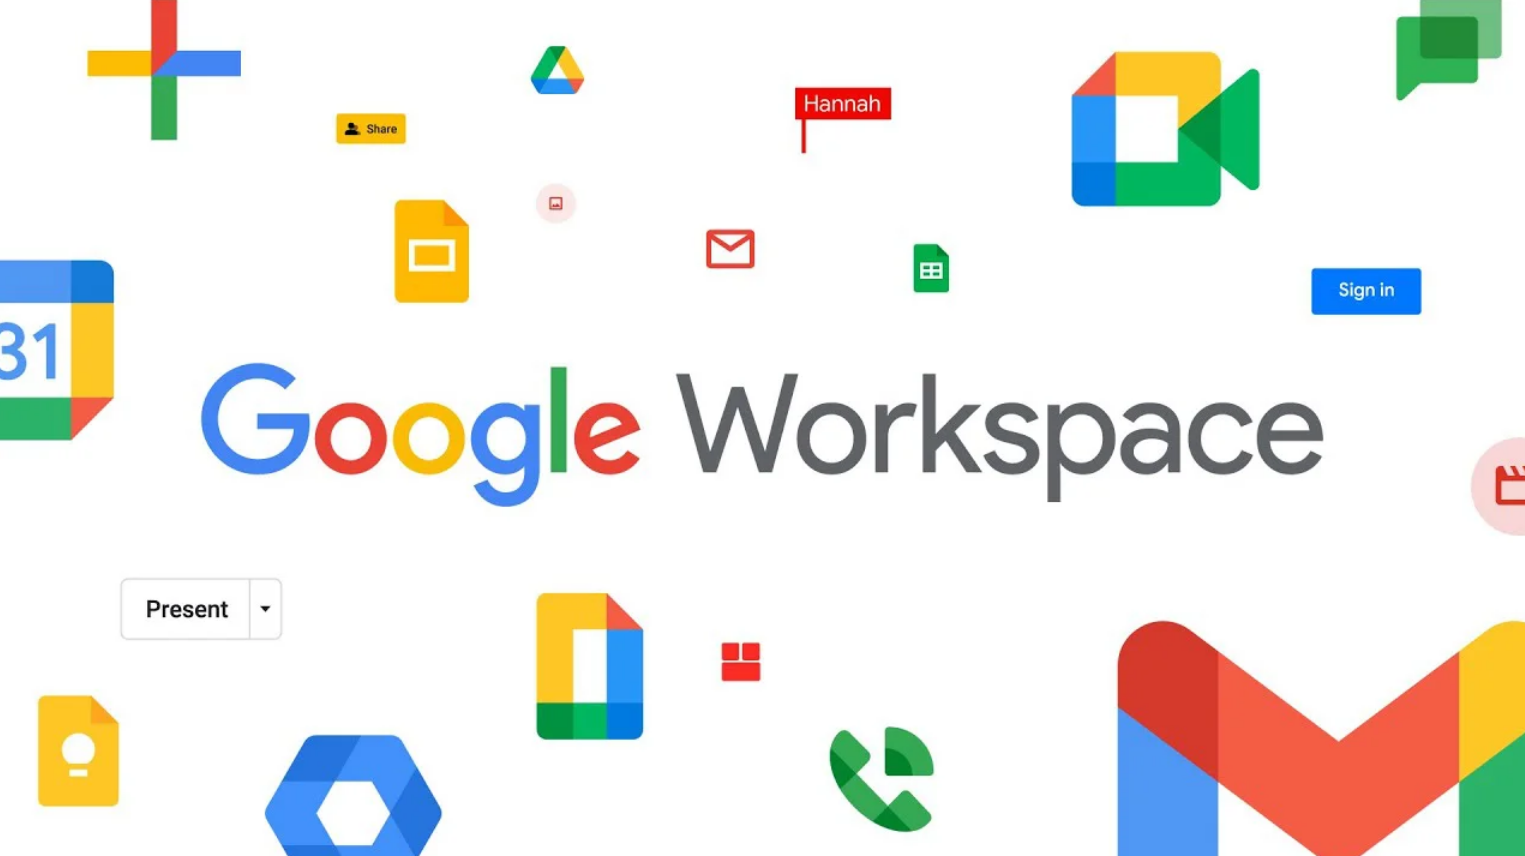 Google Workspace is currently accessible for Google's 3 billion Gmail clients